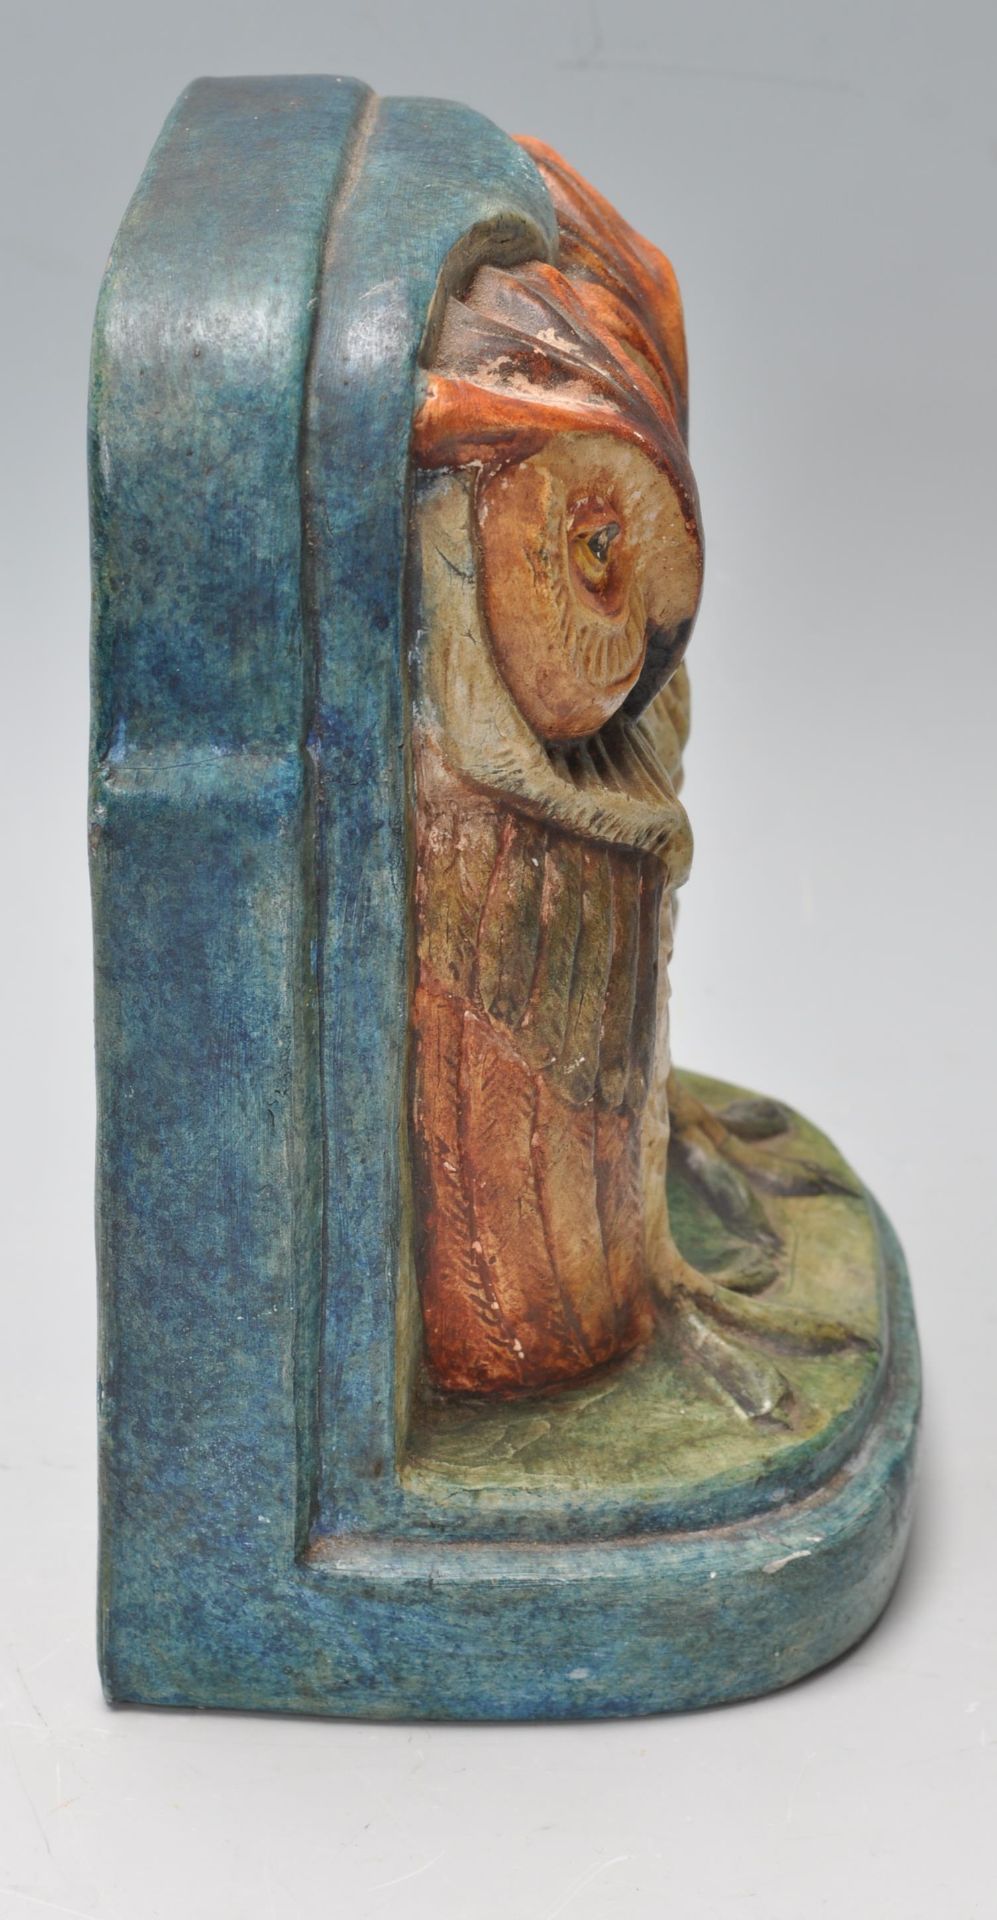 RARE EARLY 20TH CENTURY ARTS AND CRAFTS COMPTON POTTERY OWL BOOKEND - Image 4 of 7